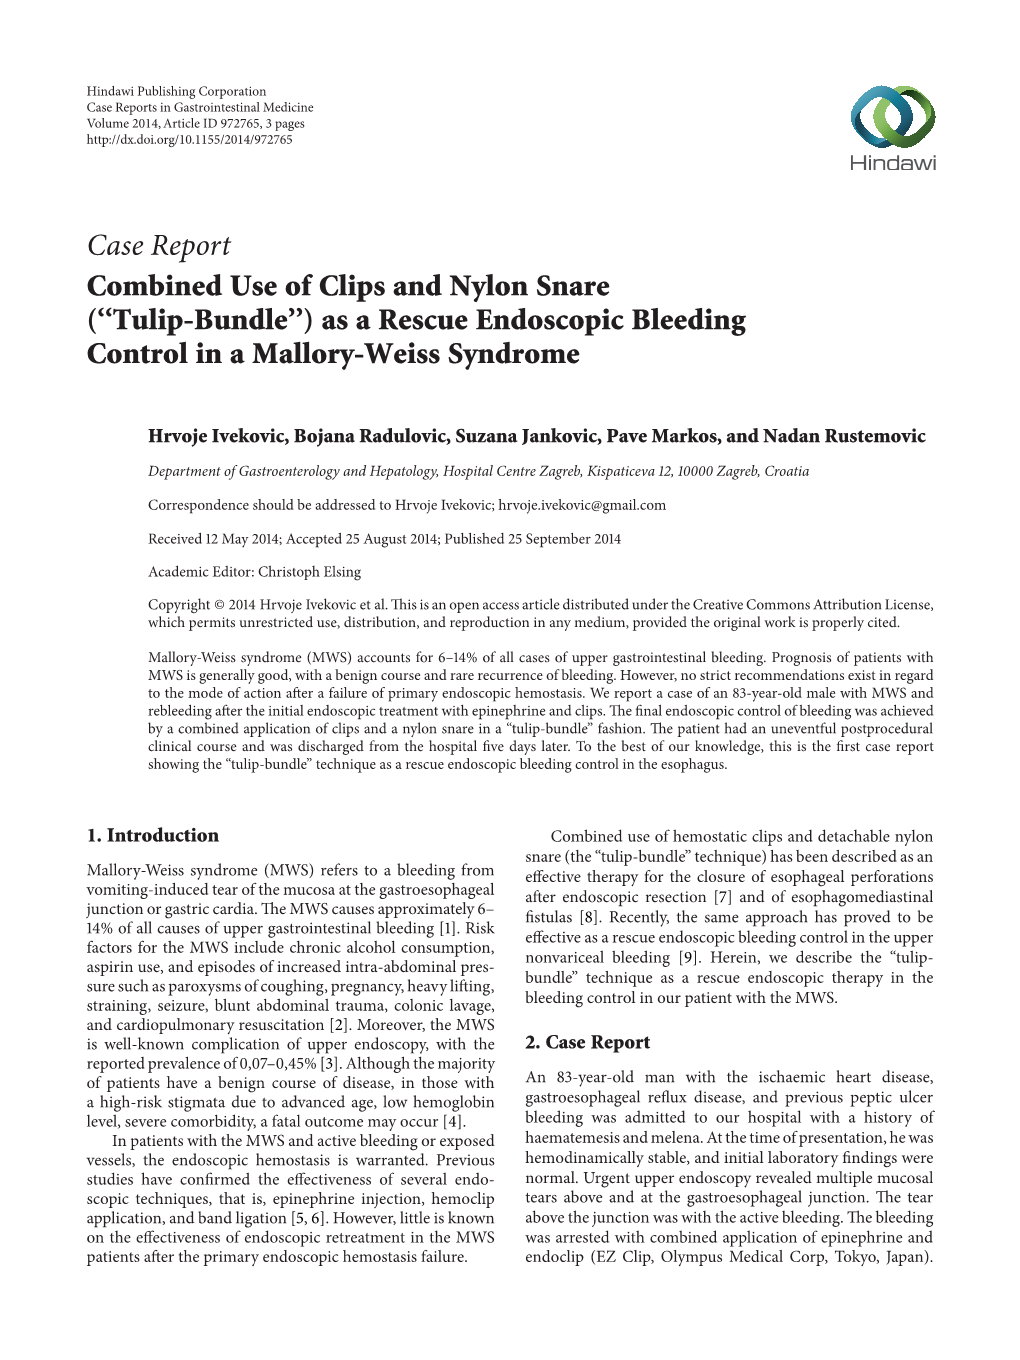 Combined Use of Clips and Nylon Snare (“Tulip-Bundle”) As a Rescue Endoscopic Bleeding Control in a Mallory-Weiss Syndrome